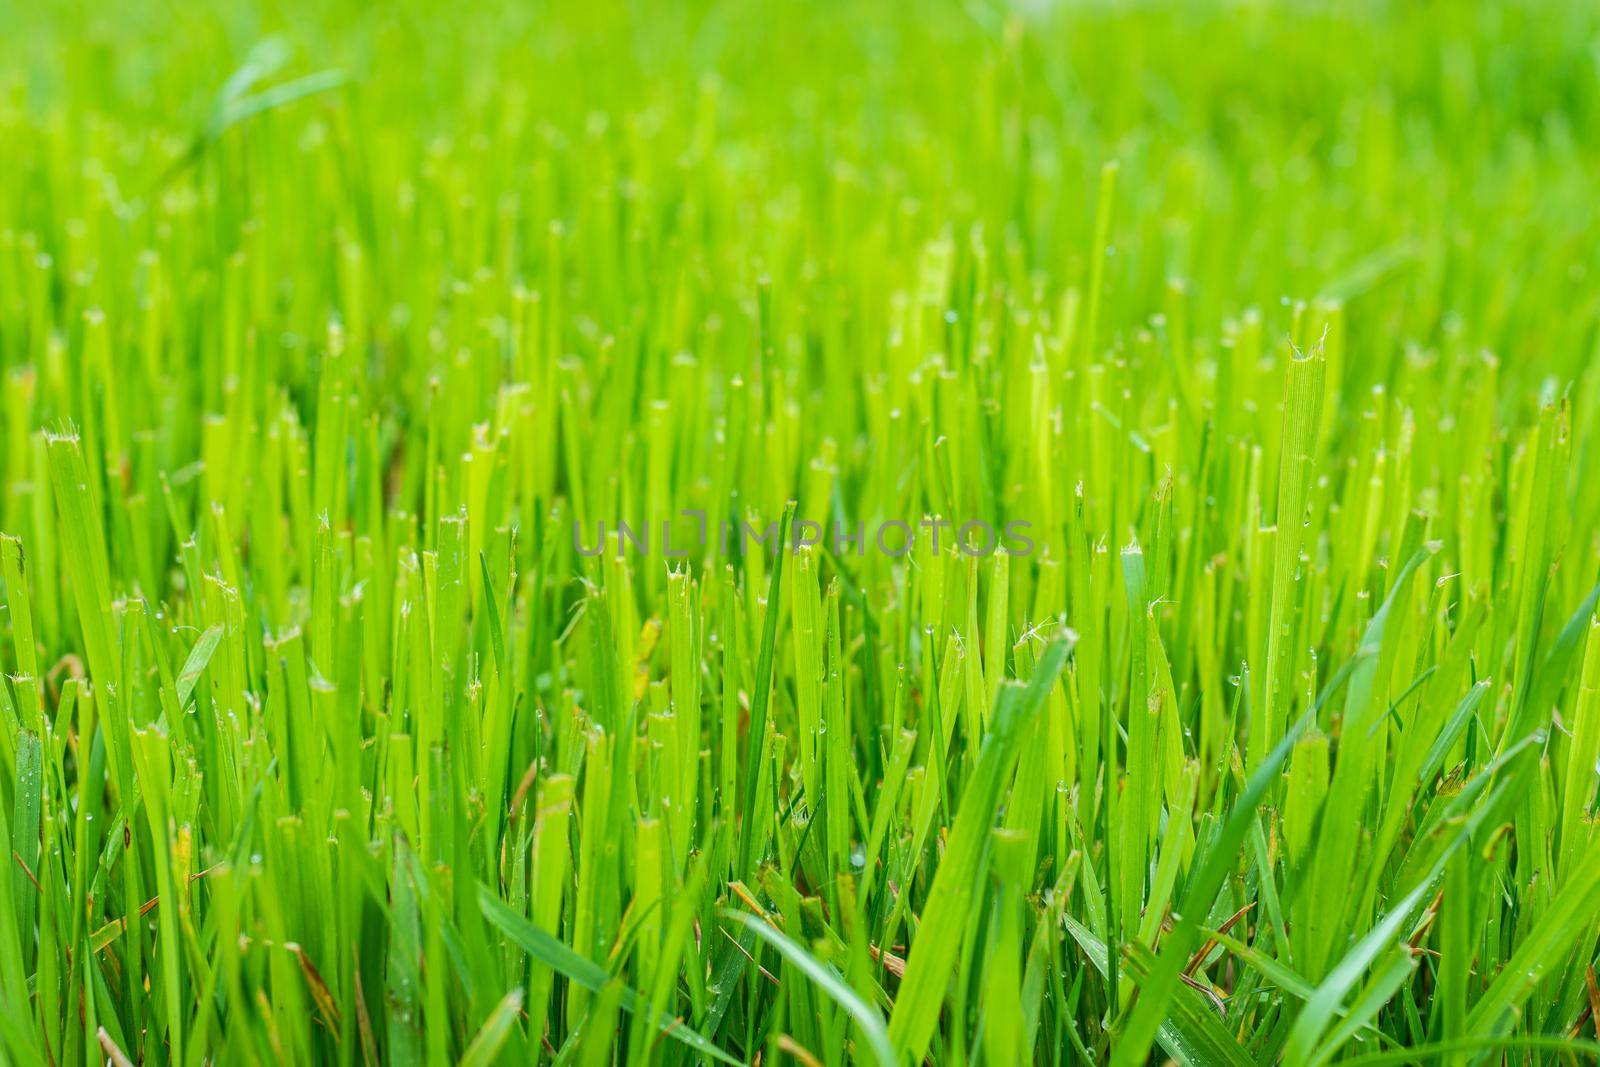 Trimmed fresh lawn close up by Madhourse